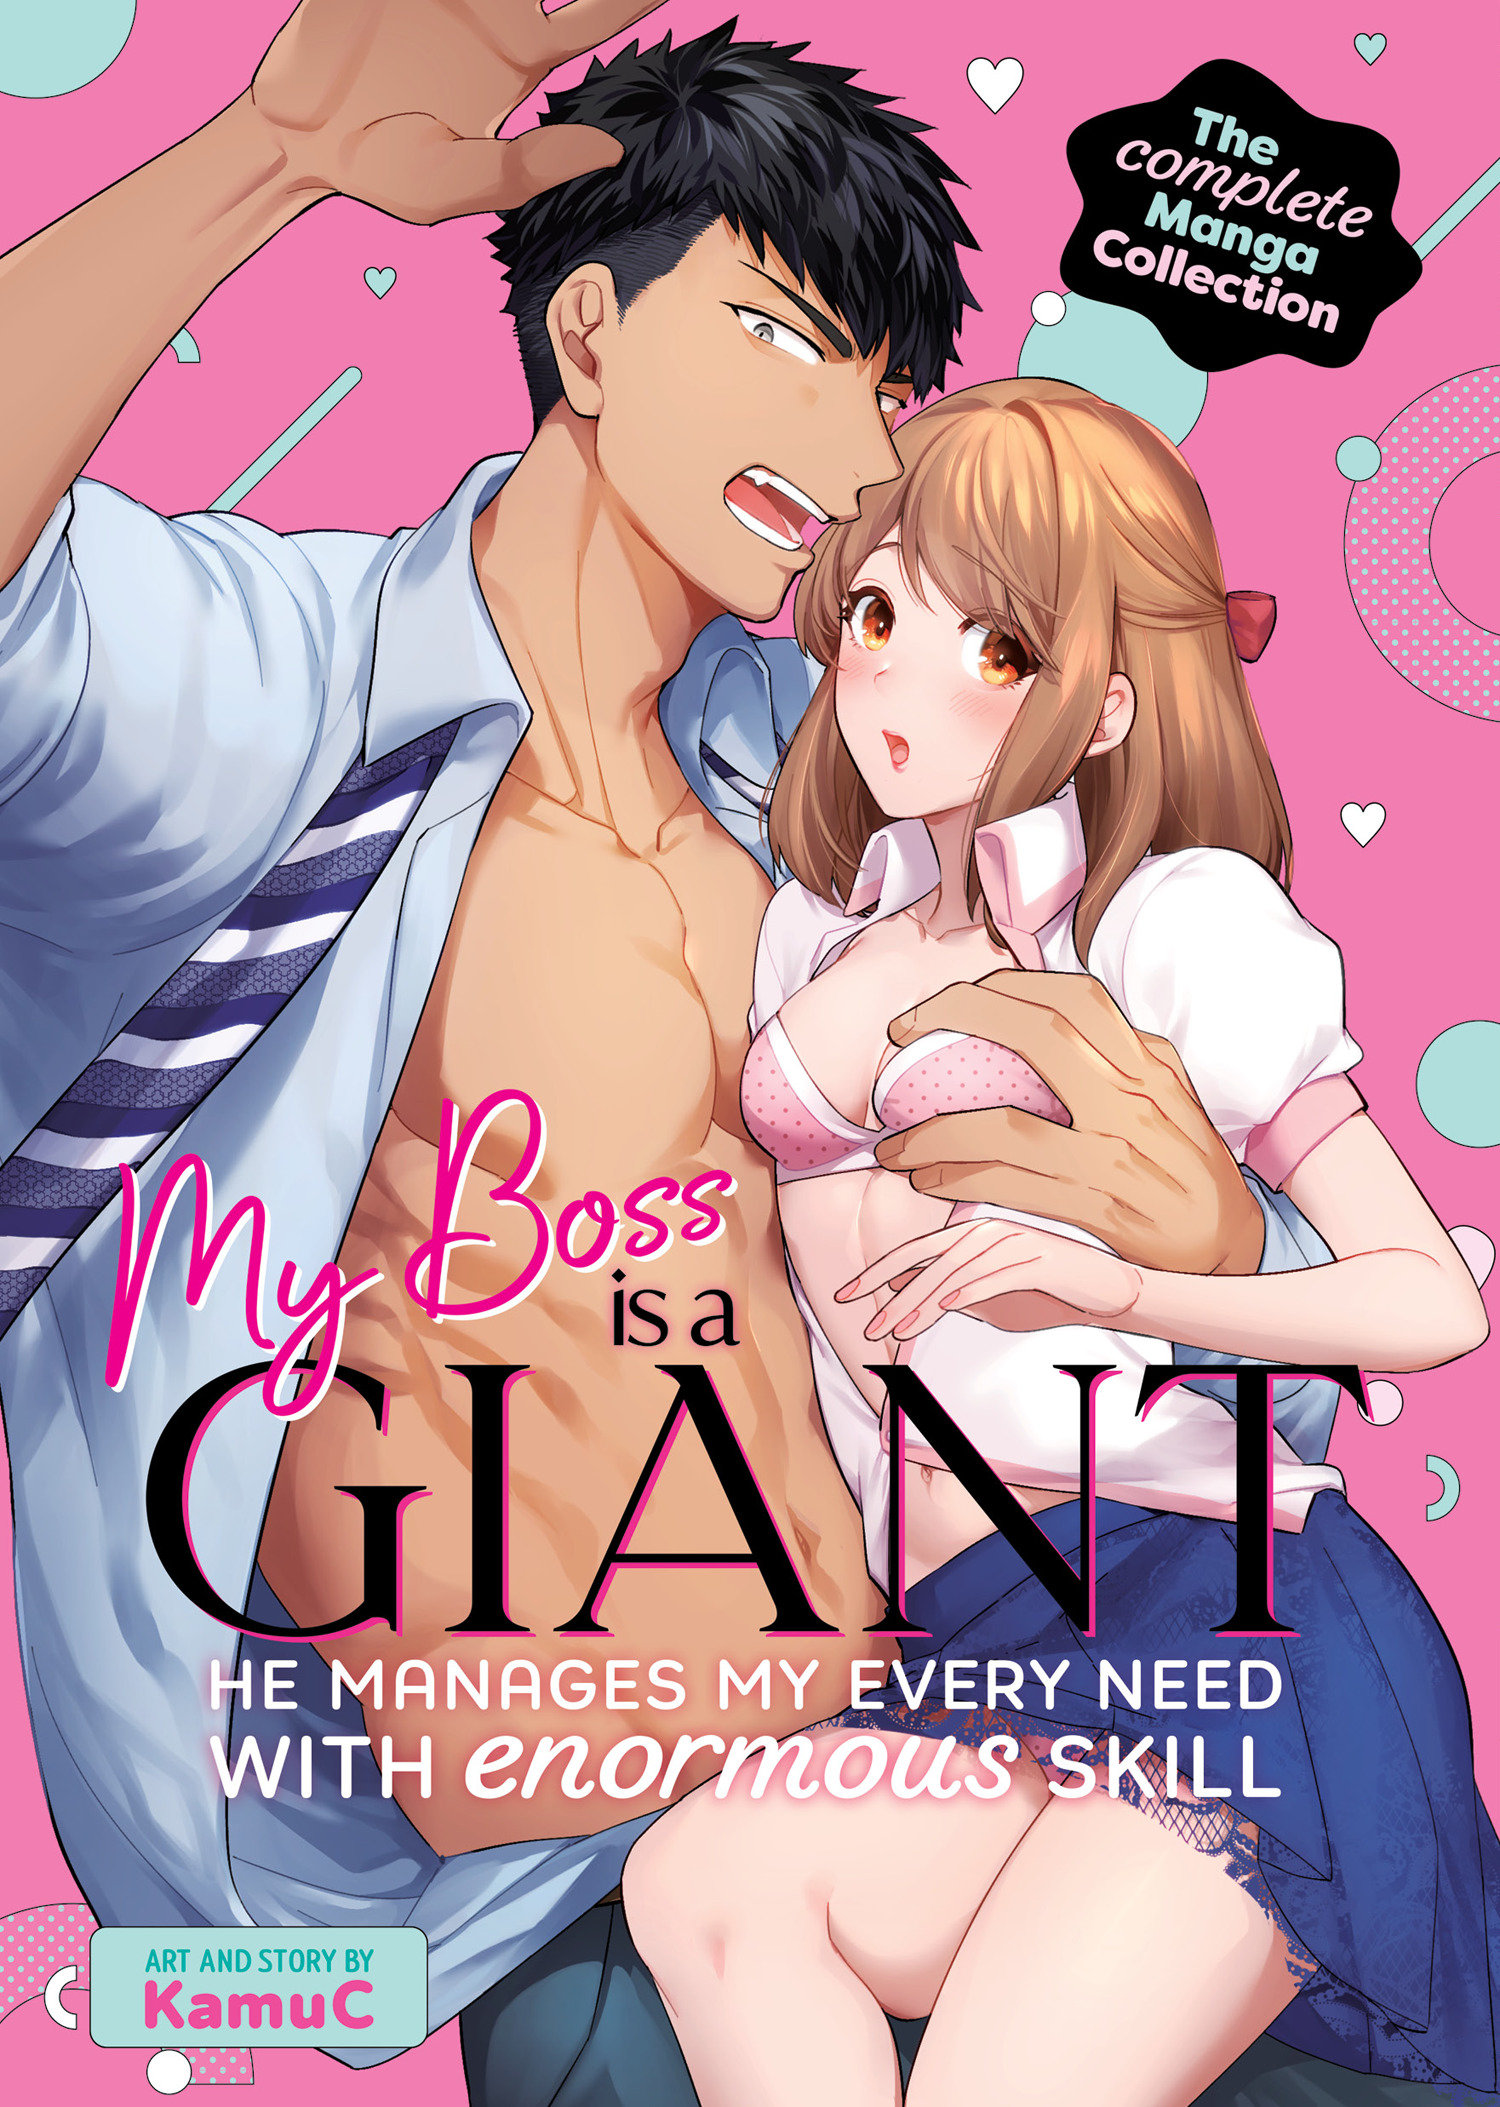 My Boss Is A Giant: He Manages My Every Need With Enormous Skill Complete Manga Collection (Adult)